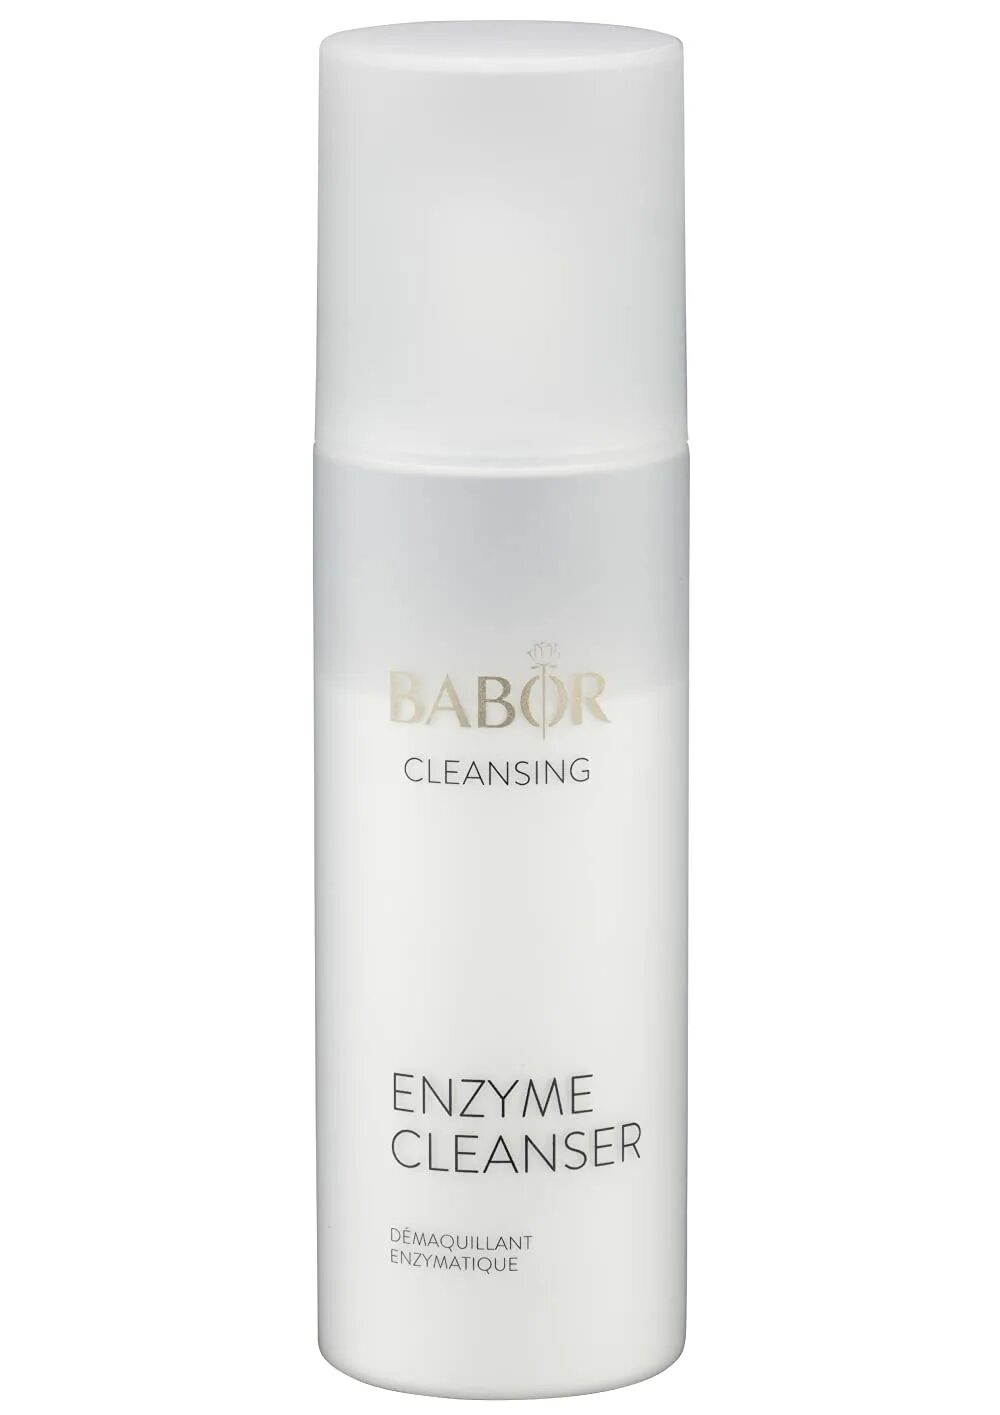 Babor cleansing. Babor Enzyme Cleanser. Babor Enzyme Cleanser 20g. Babor Enzyme Cleanser 40. Acid Cleansing Gel бабор.